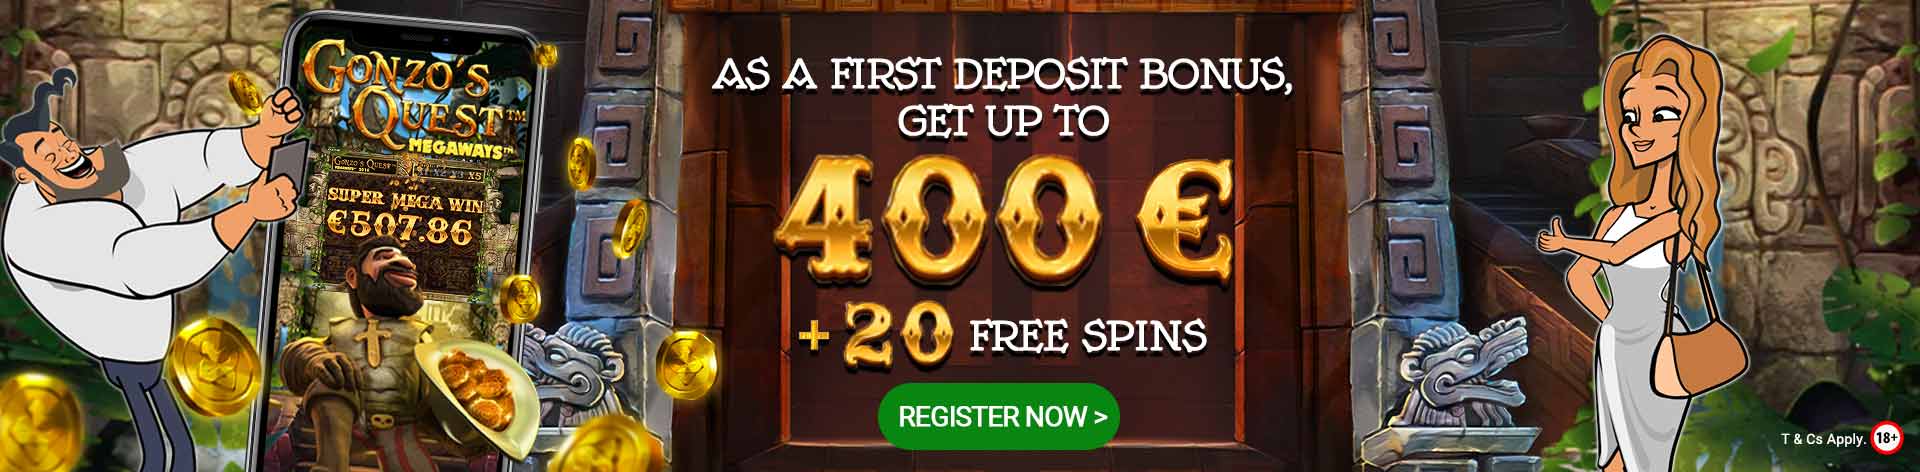 As a First Deposit Bonus, get up to 400 € + 20 Free Spins. Register now!